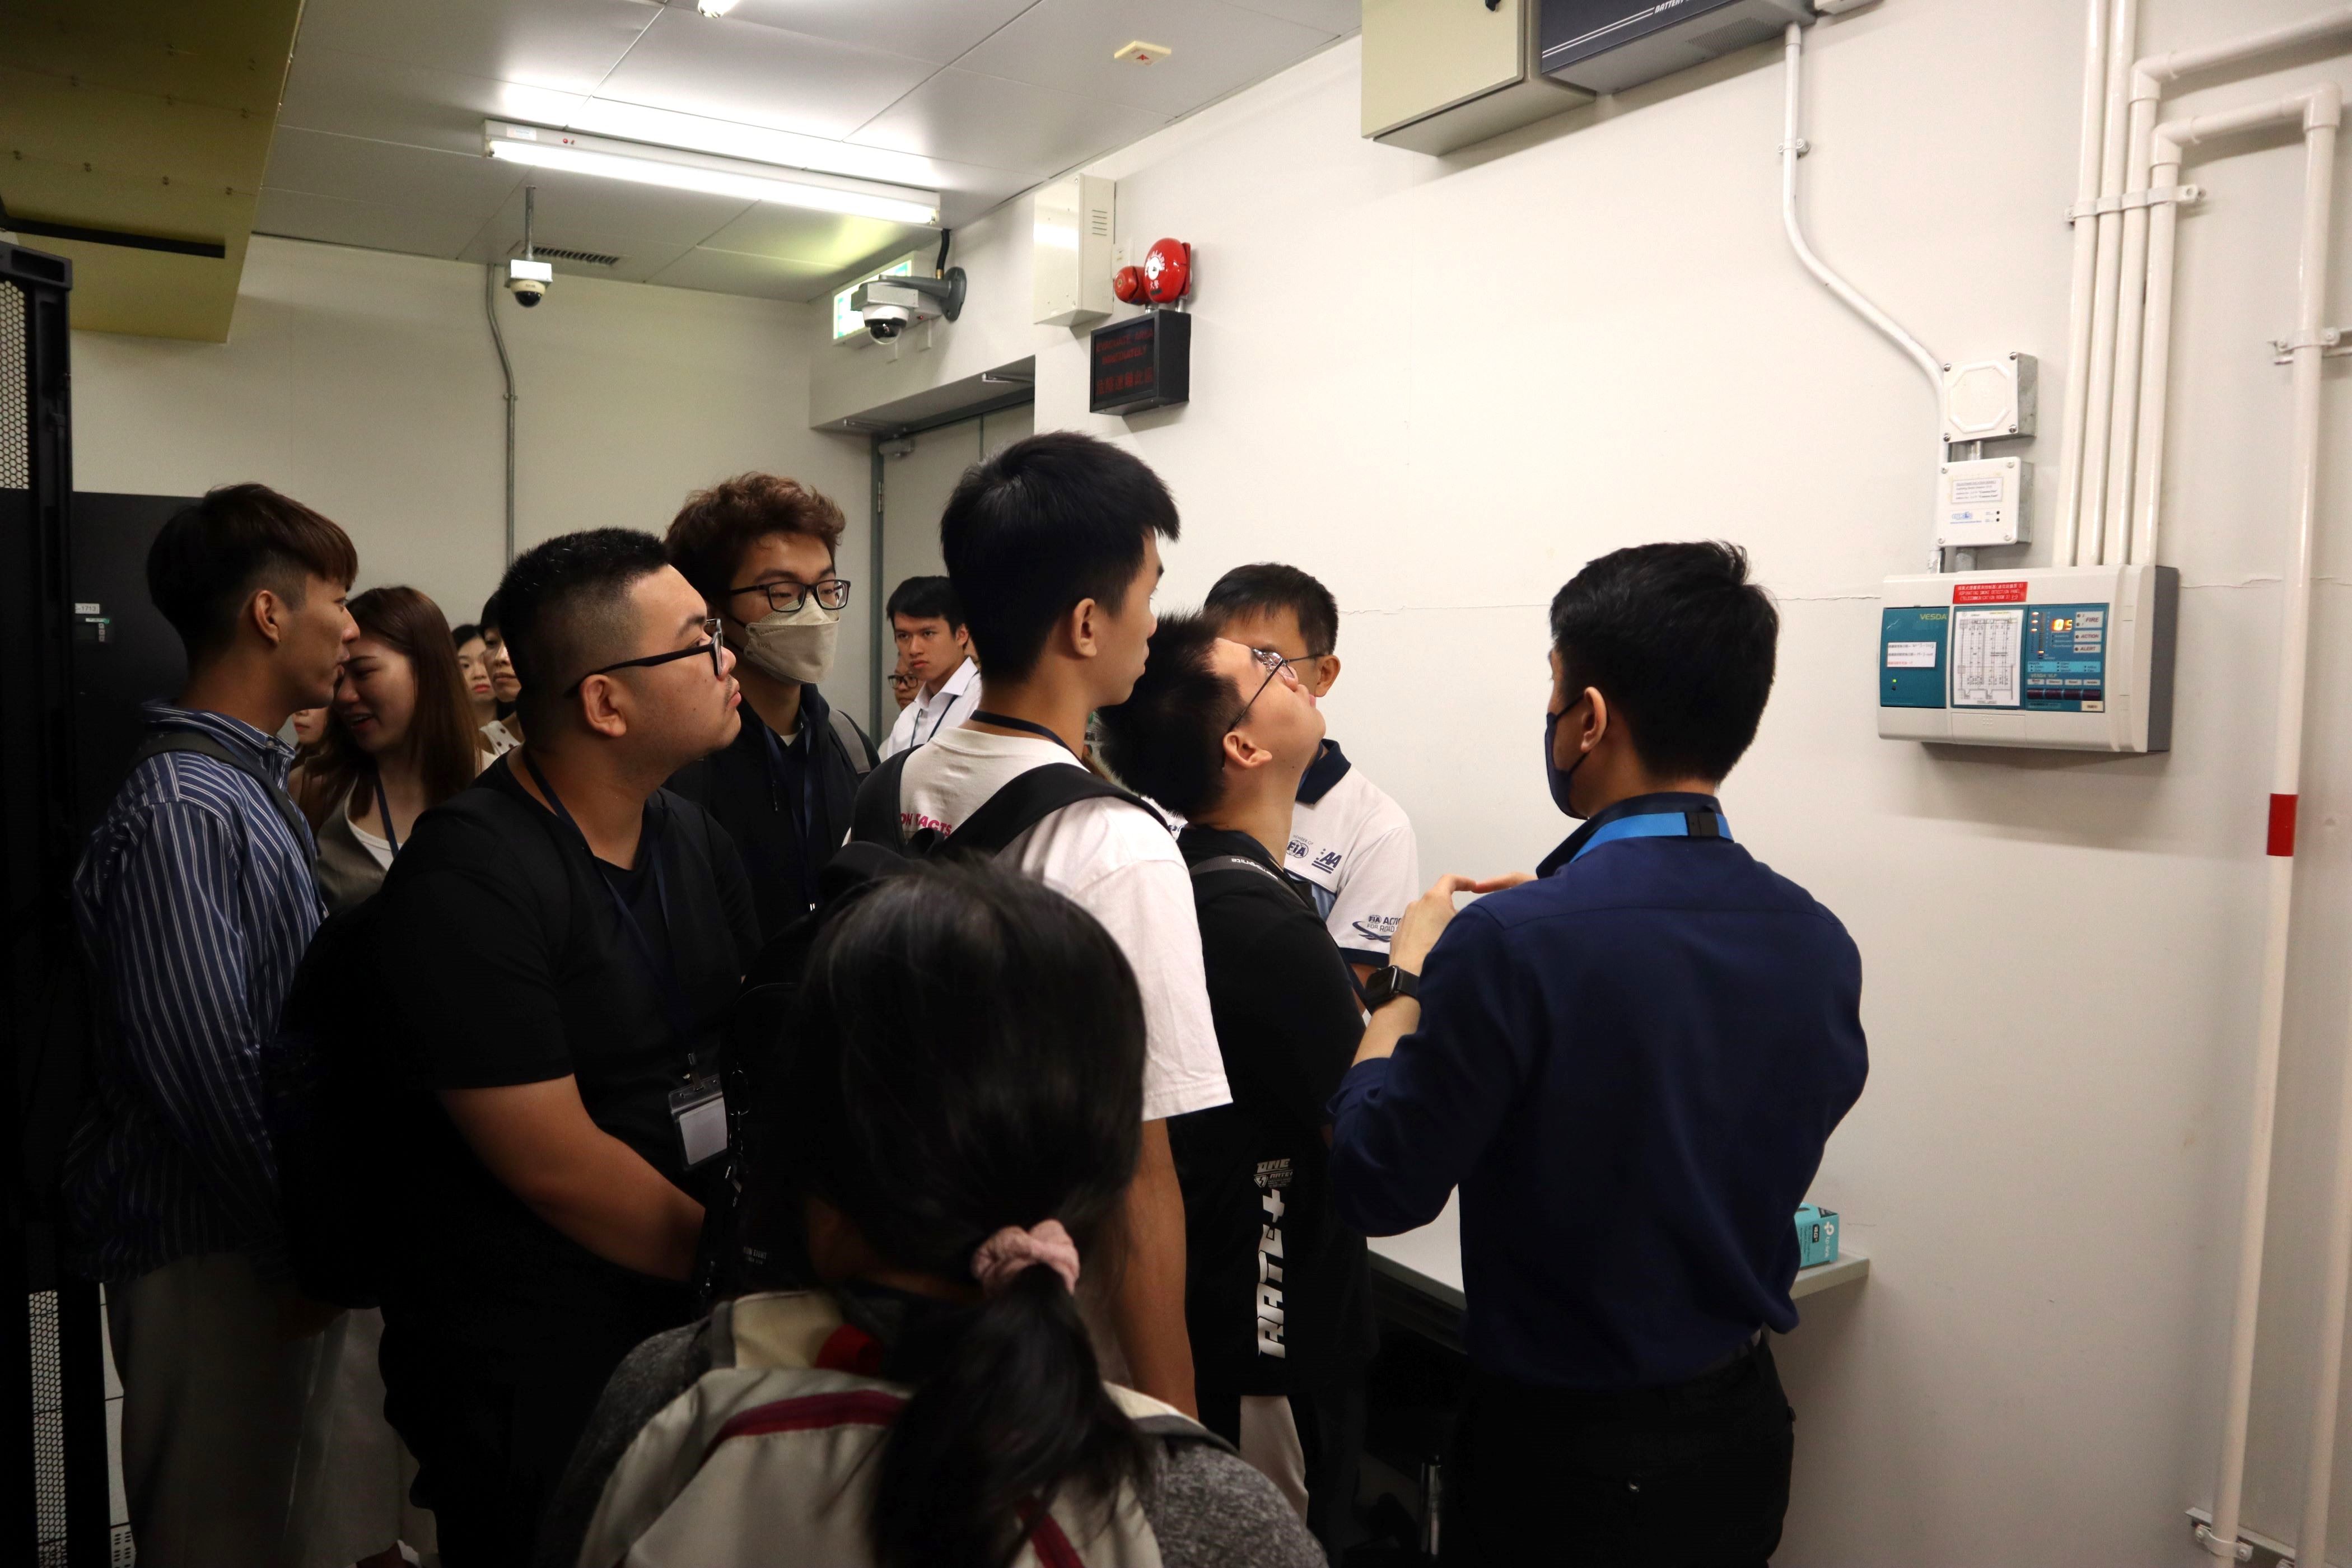 【Exploring CITIC Telecom Data Center】Leading Students into the IT Industry and Shaping the Next-Gen Innovation Talent (Chinese Only)